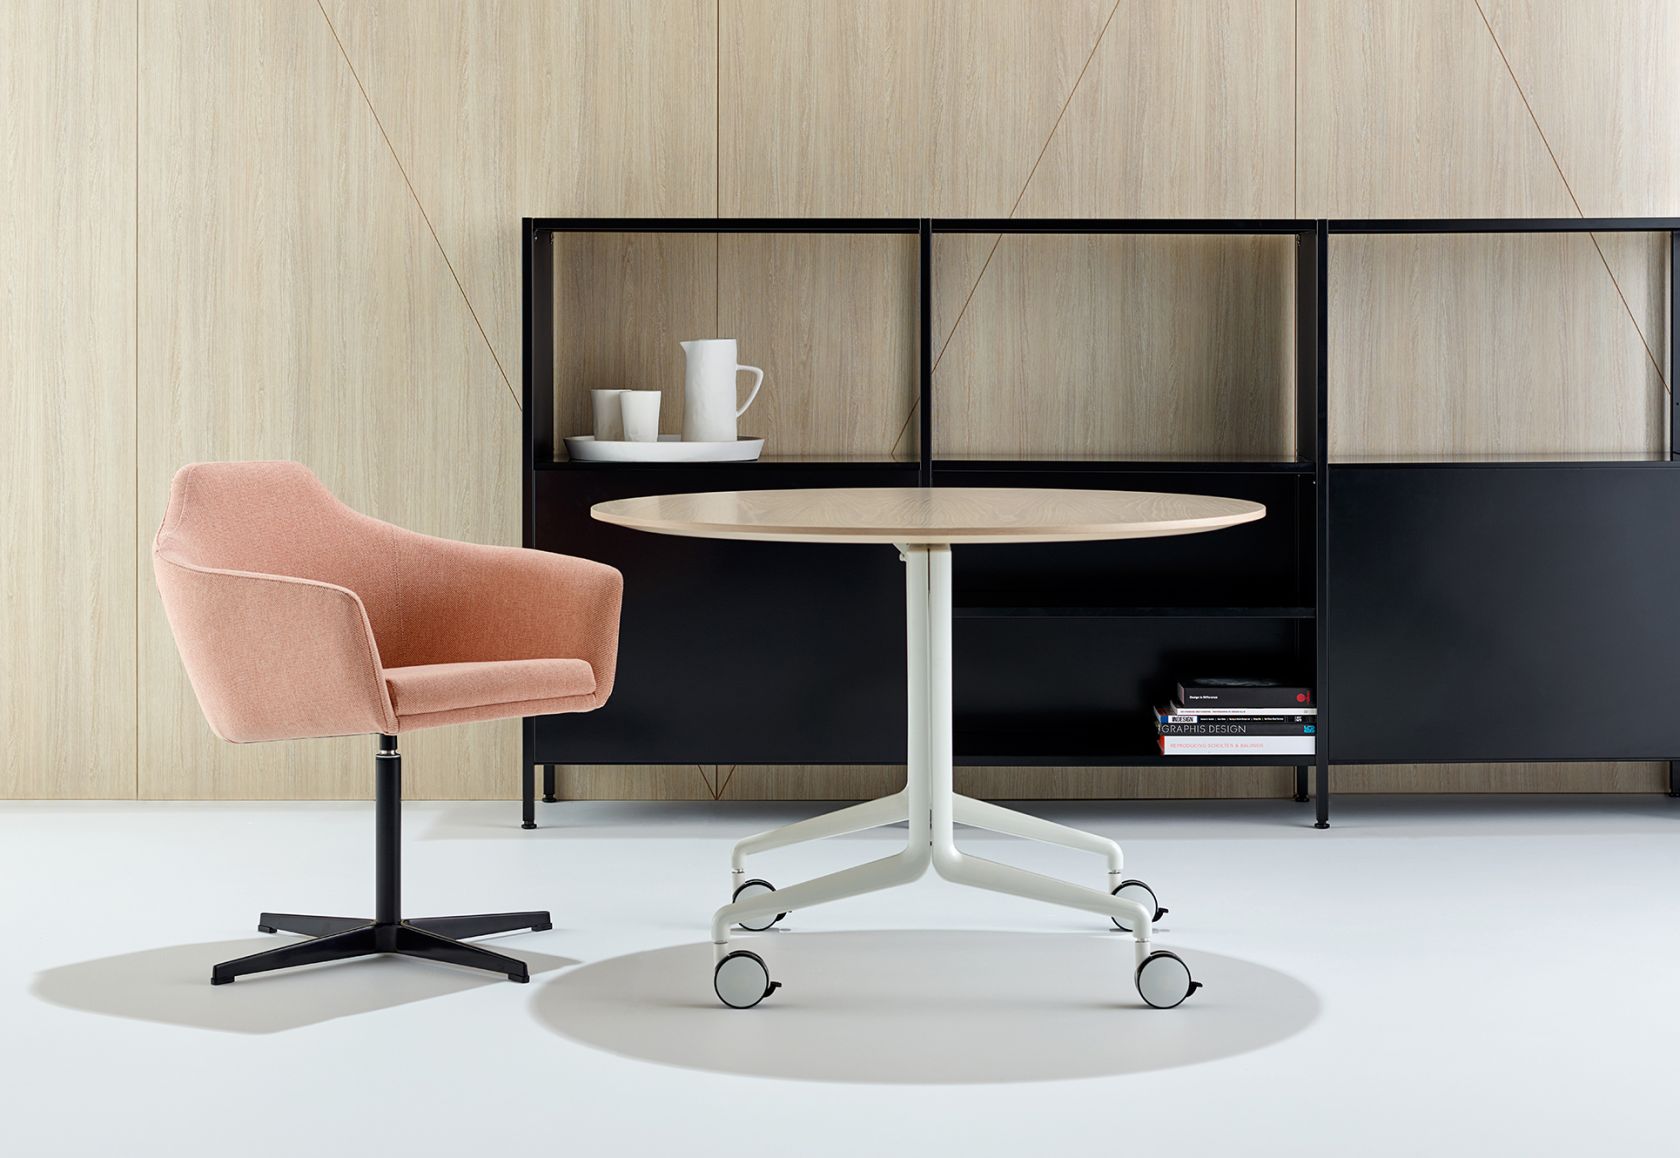 Aire Fold Round Table, Palomino Chair & Kase Storage